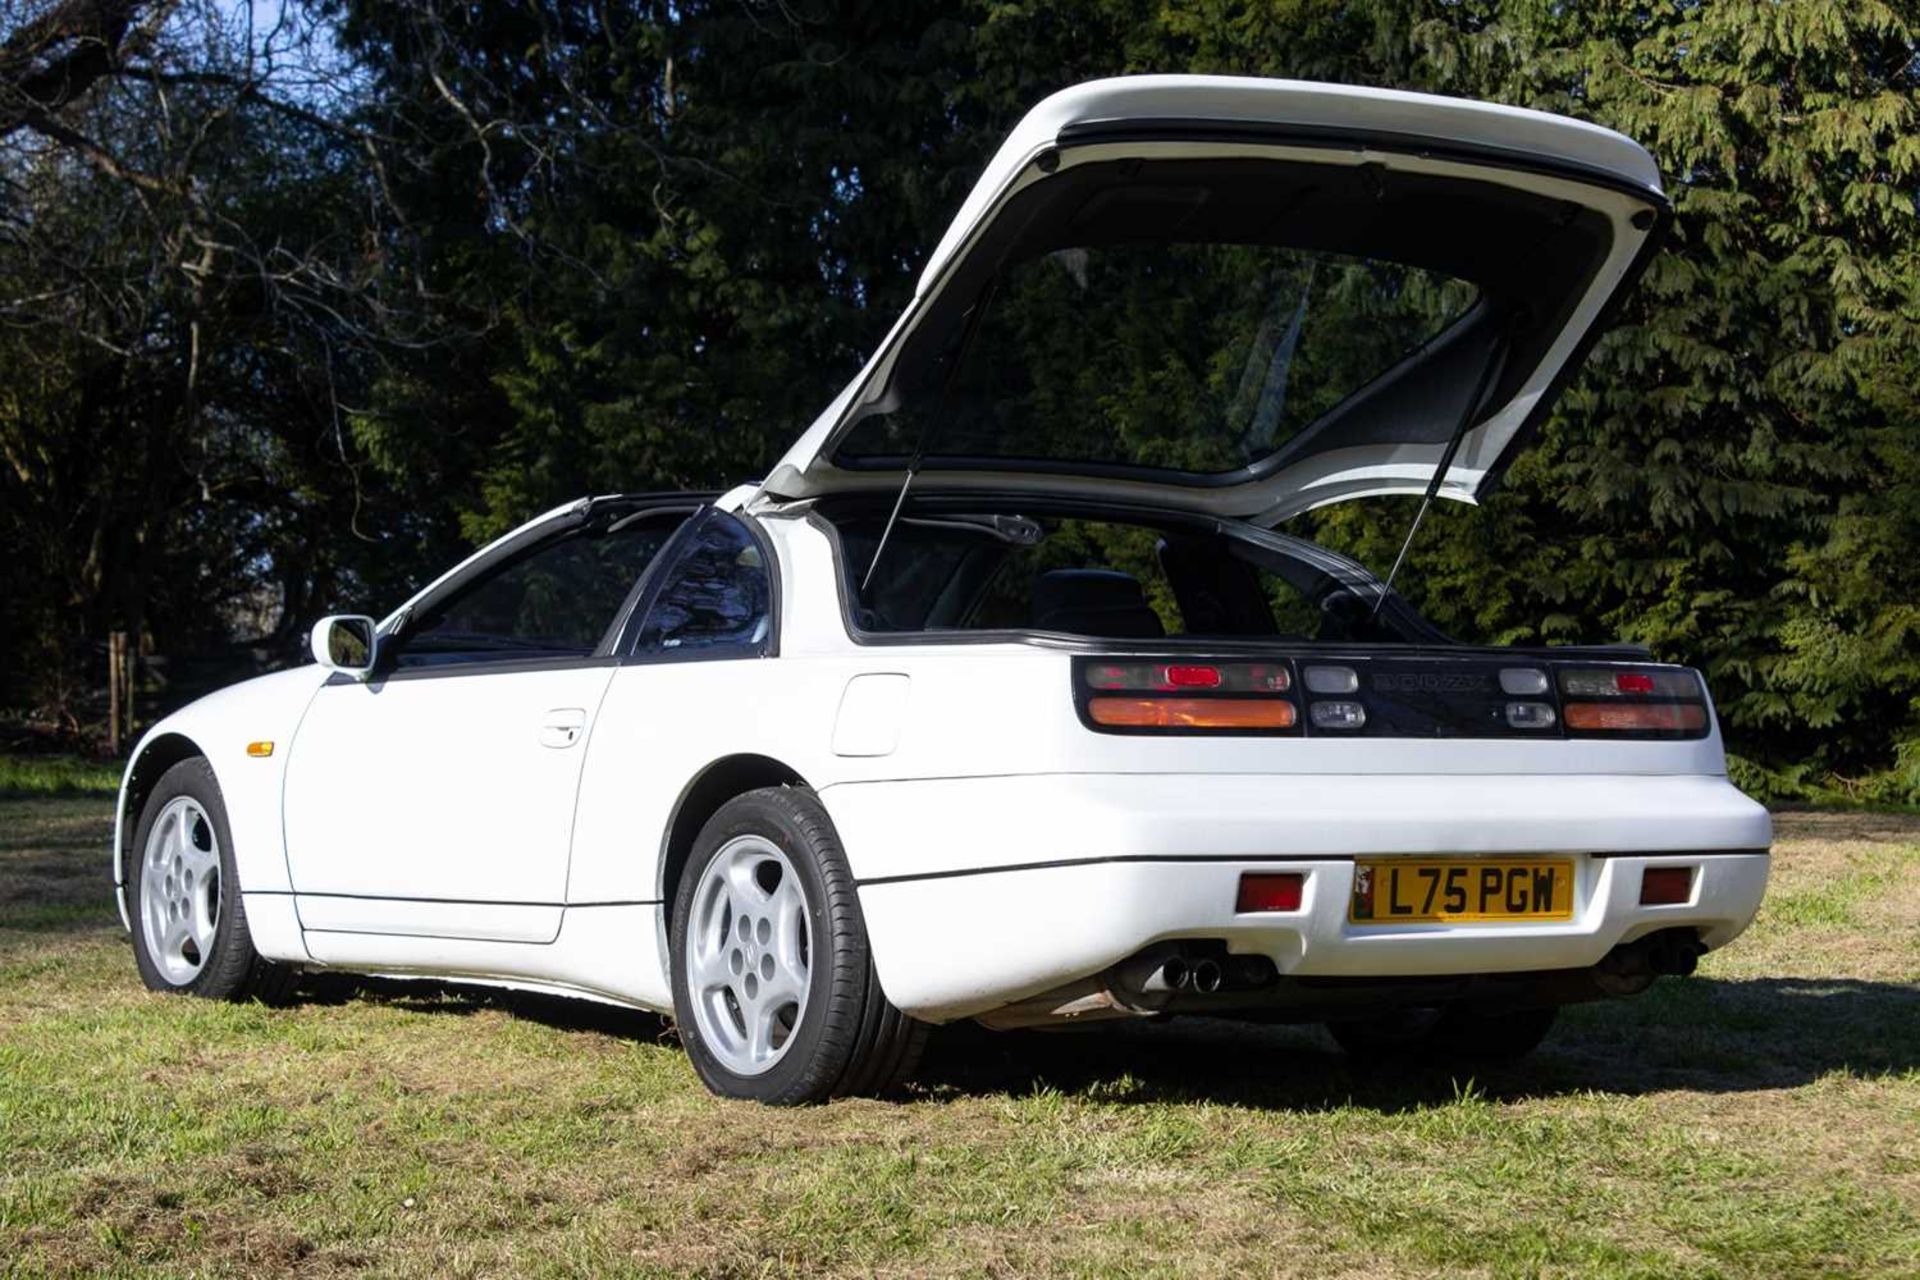 1990 Nissan 300ZX Turbo 2+2 Targa One of the last examples registered in the UK - Image 46 of 89